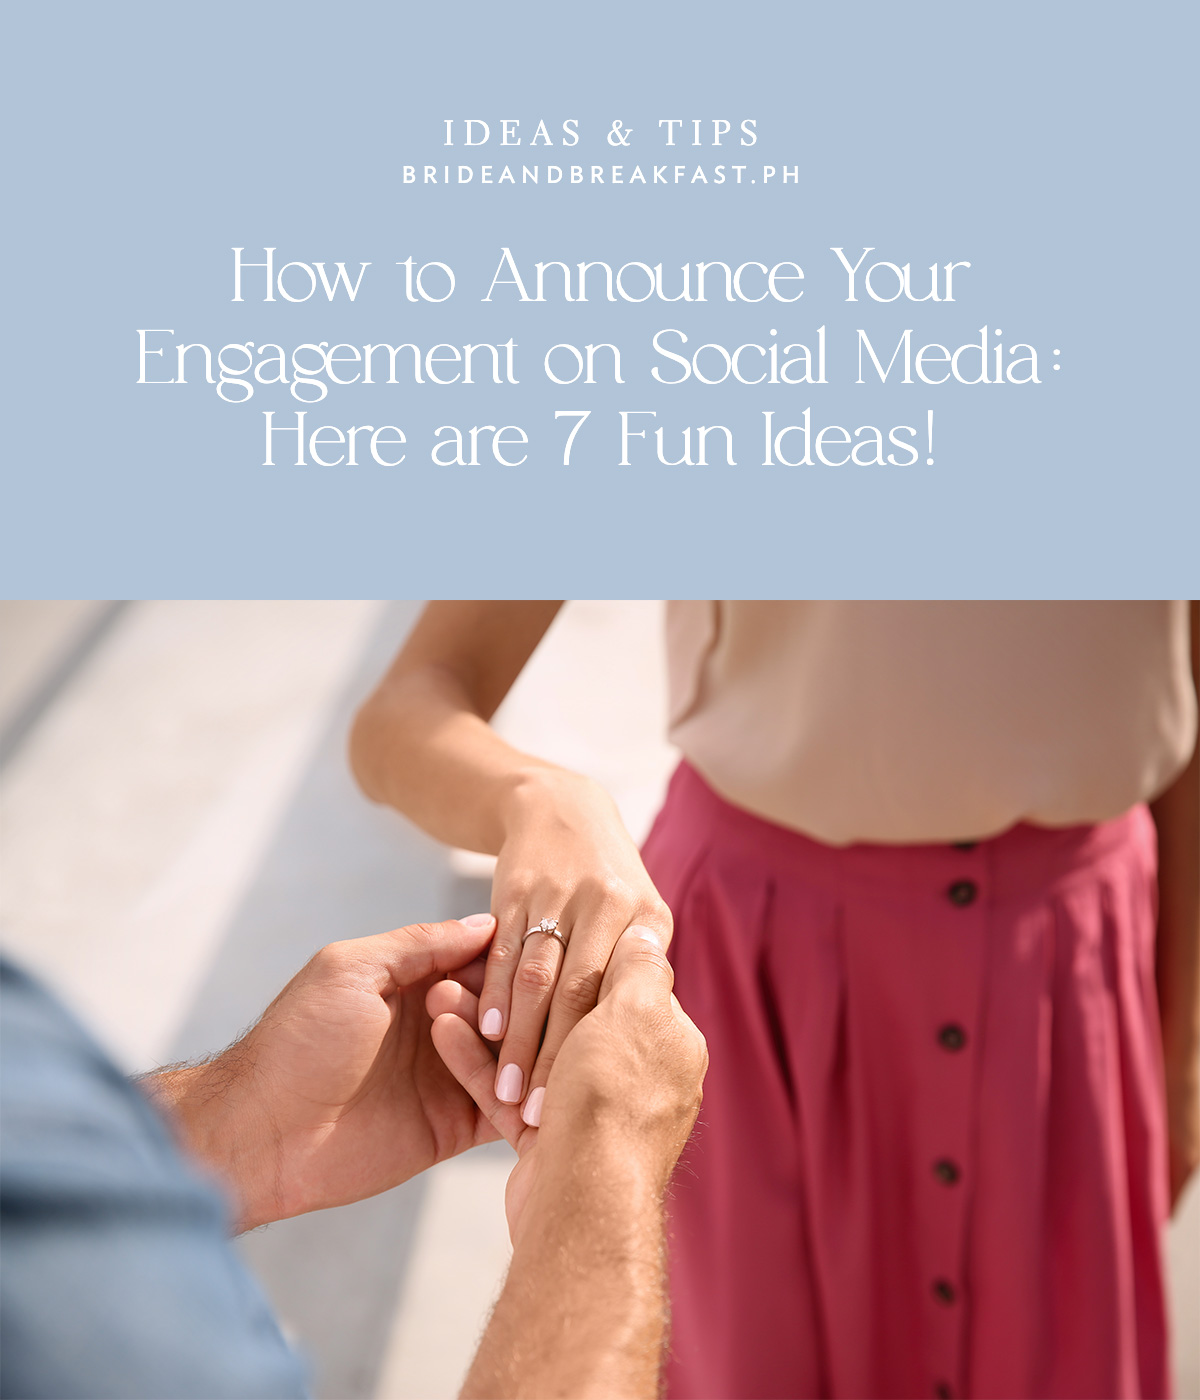 How to Announce Your Engagement on Social Media: Here are 7 Fun Ideas!